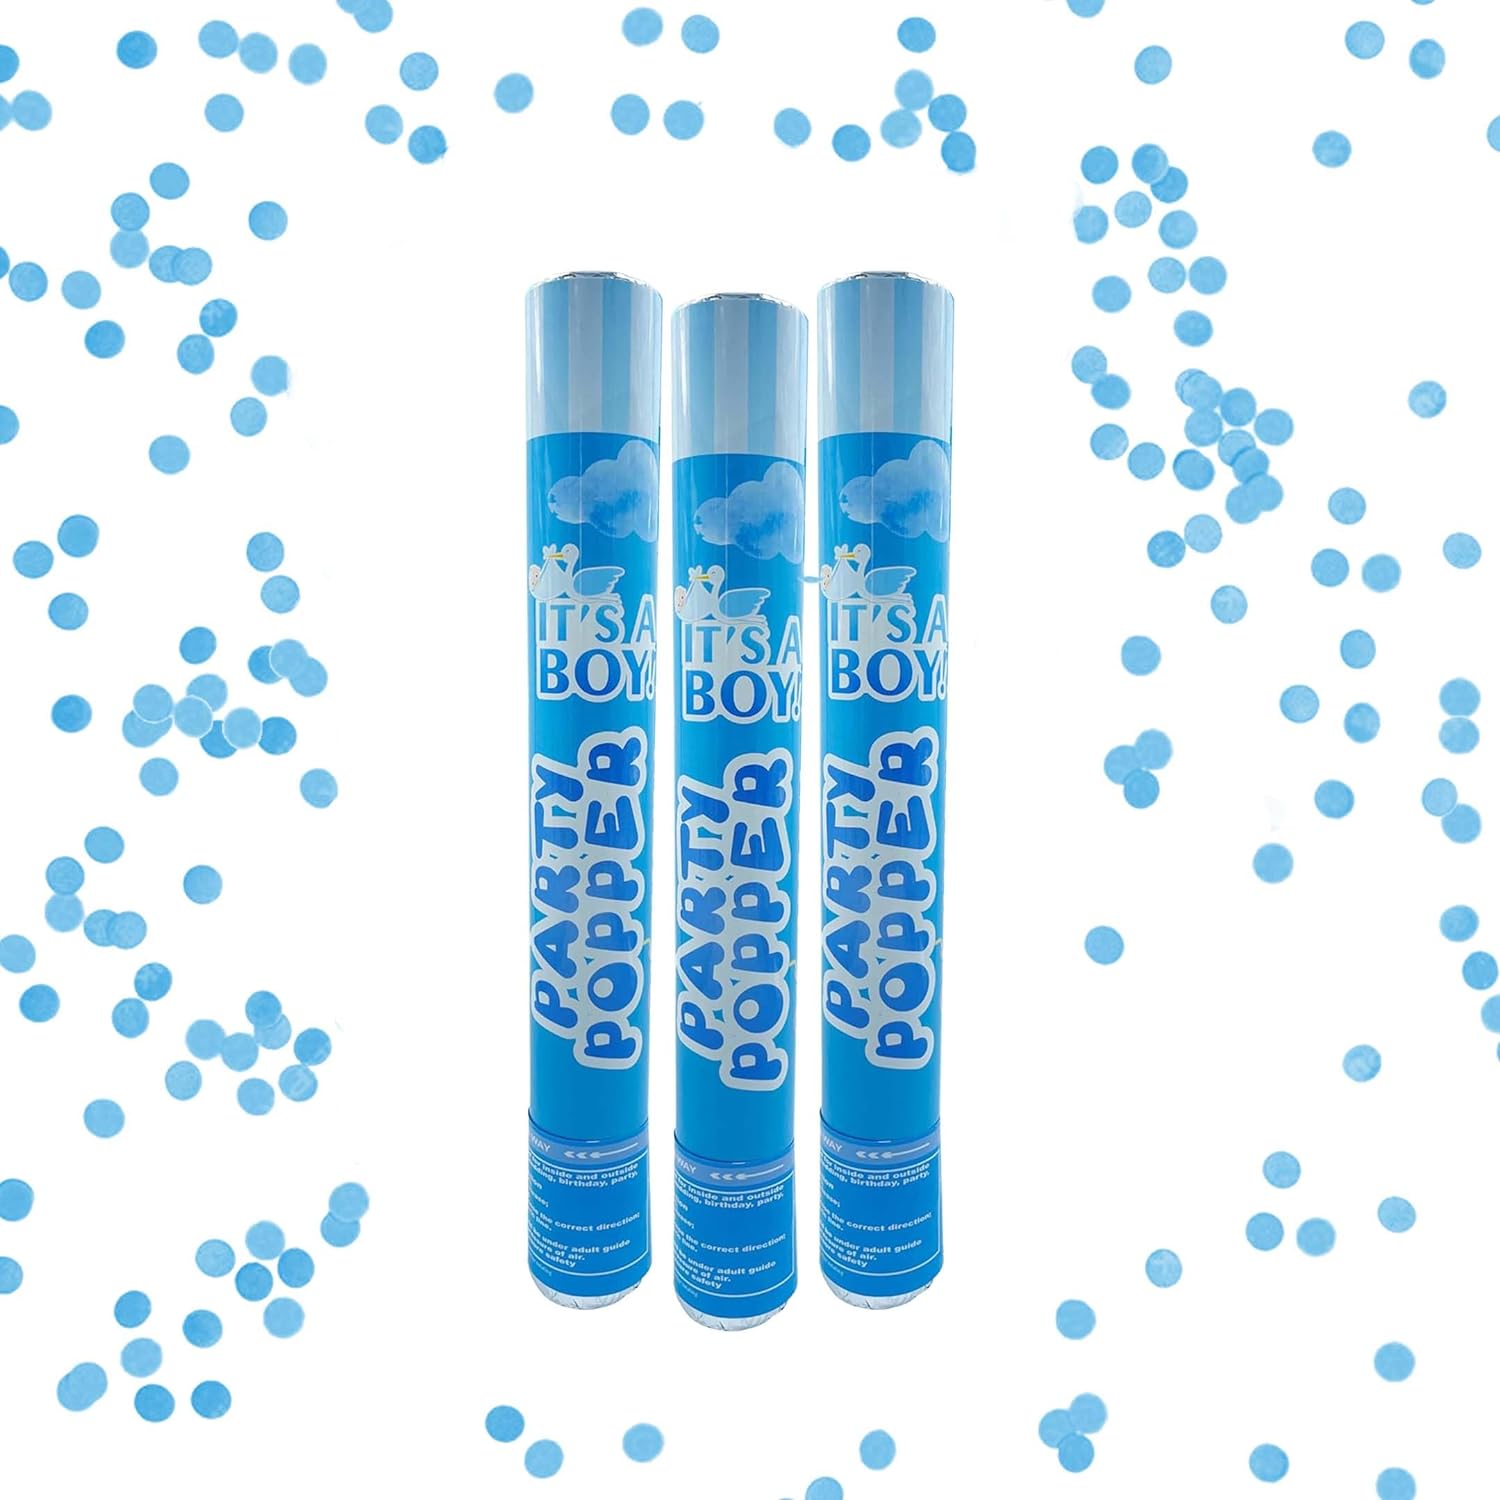 Cheer your celebration with Party Poppers